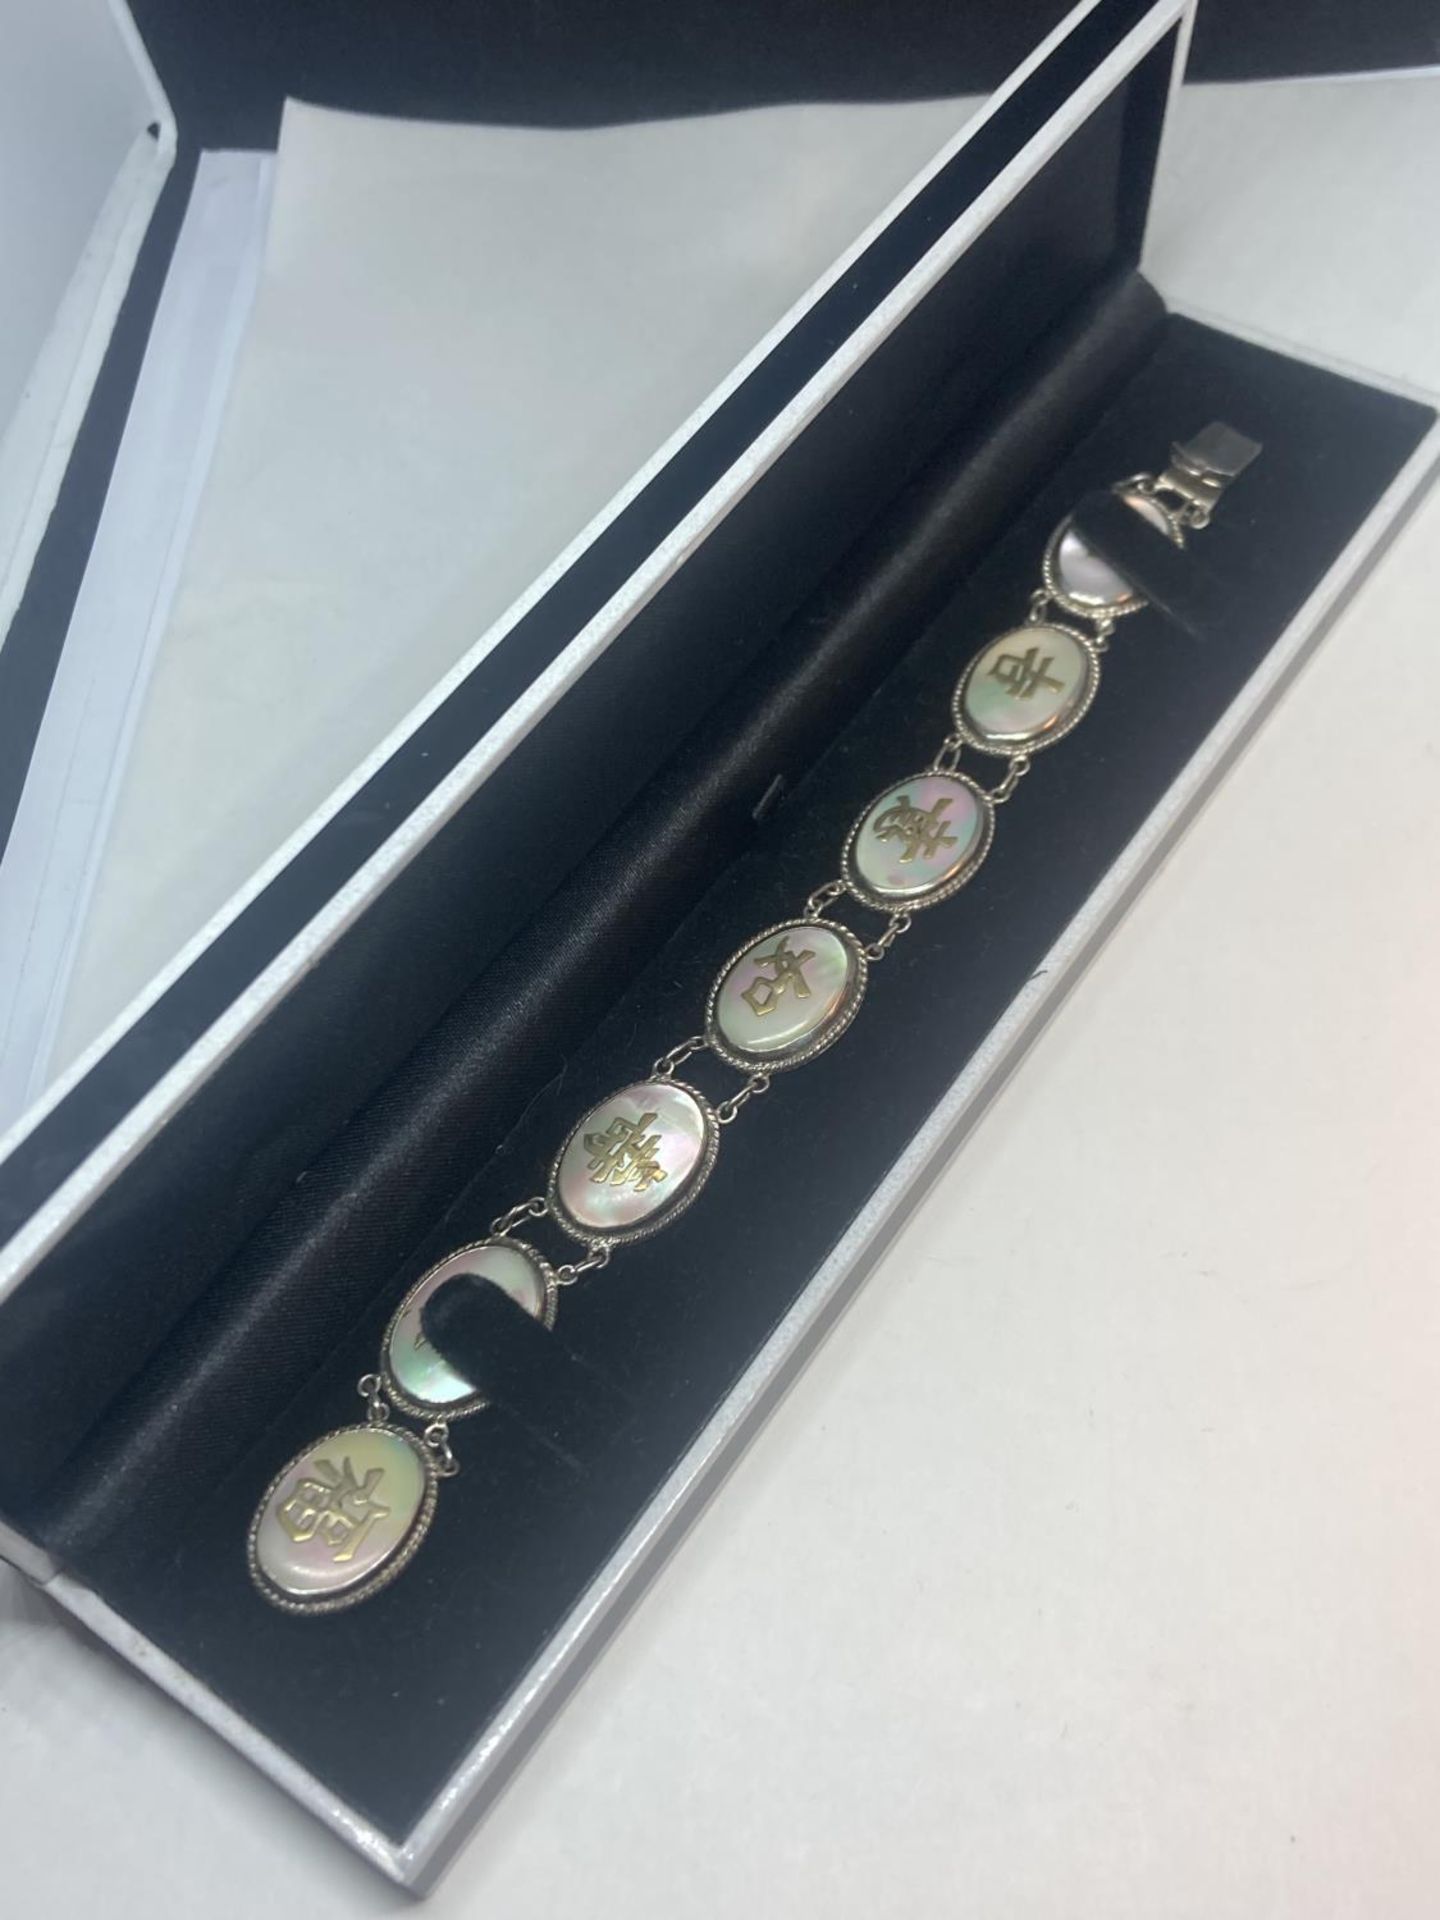 AN ORIENTAL SILVER AND MOTHER OF PEARL CHARACTER LINK BRACELET IN A PRESENTATION BOX